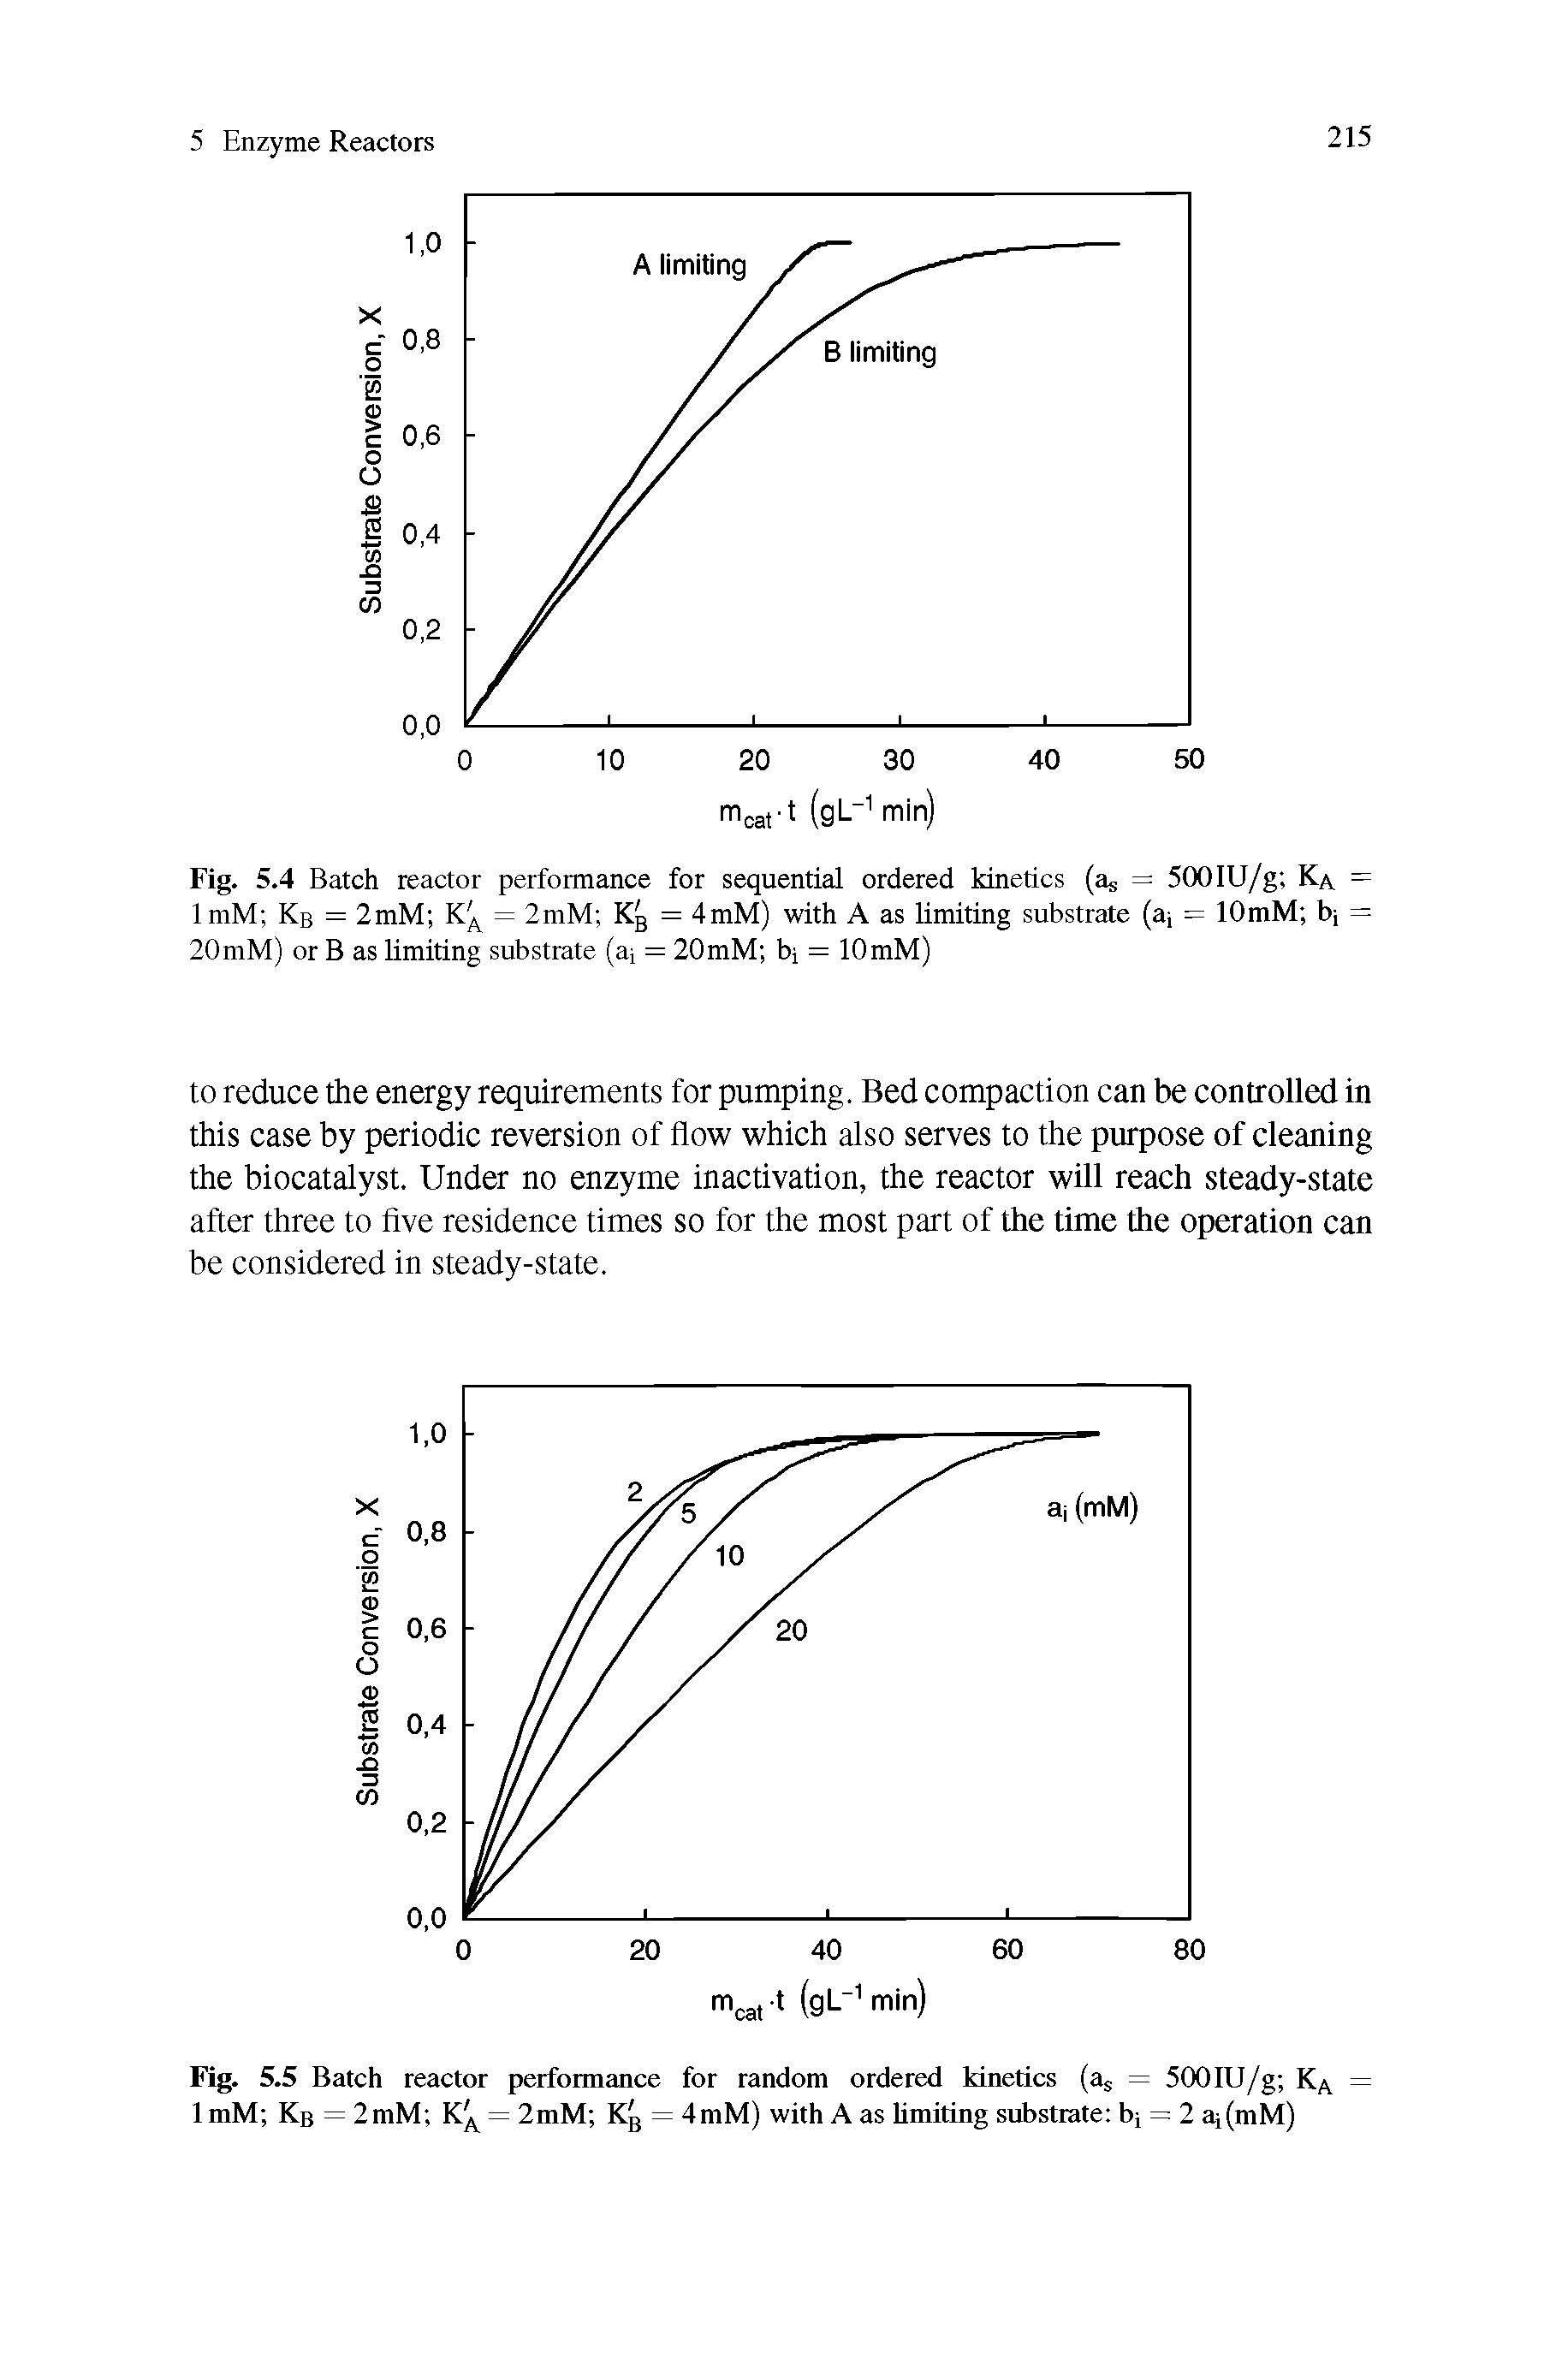 Fig. 5.4 Batch reactor performance for sequential ordered kinetics (as = 500IU/g Ka ImM Kb = 2mM = 2mM Kg = 4mM) with A as limiting substrate (ai = lOmM bj 20mM) or B as limiting substrate (ai = 20mM bi = lOmM)...